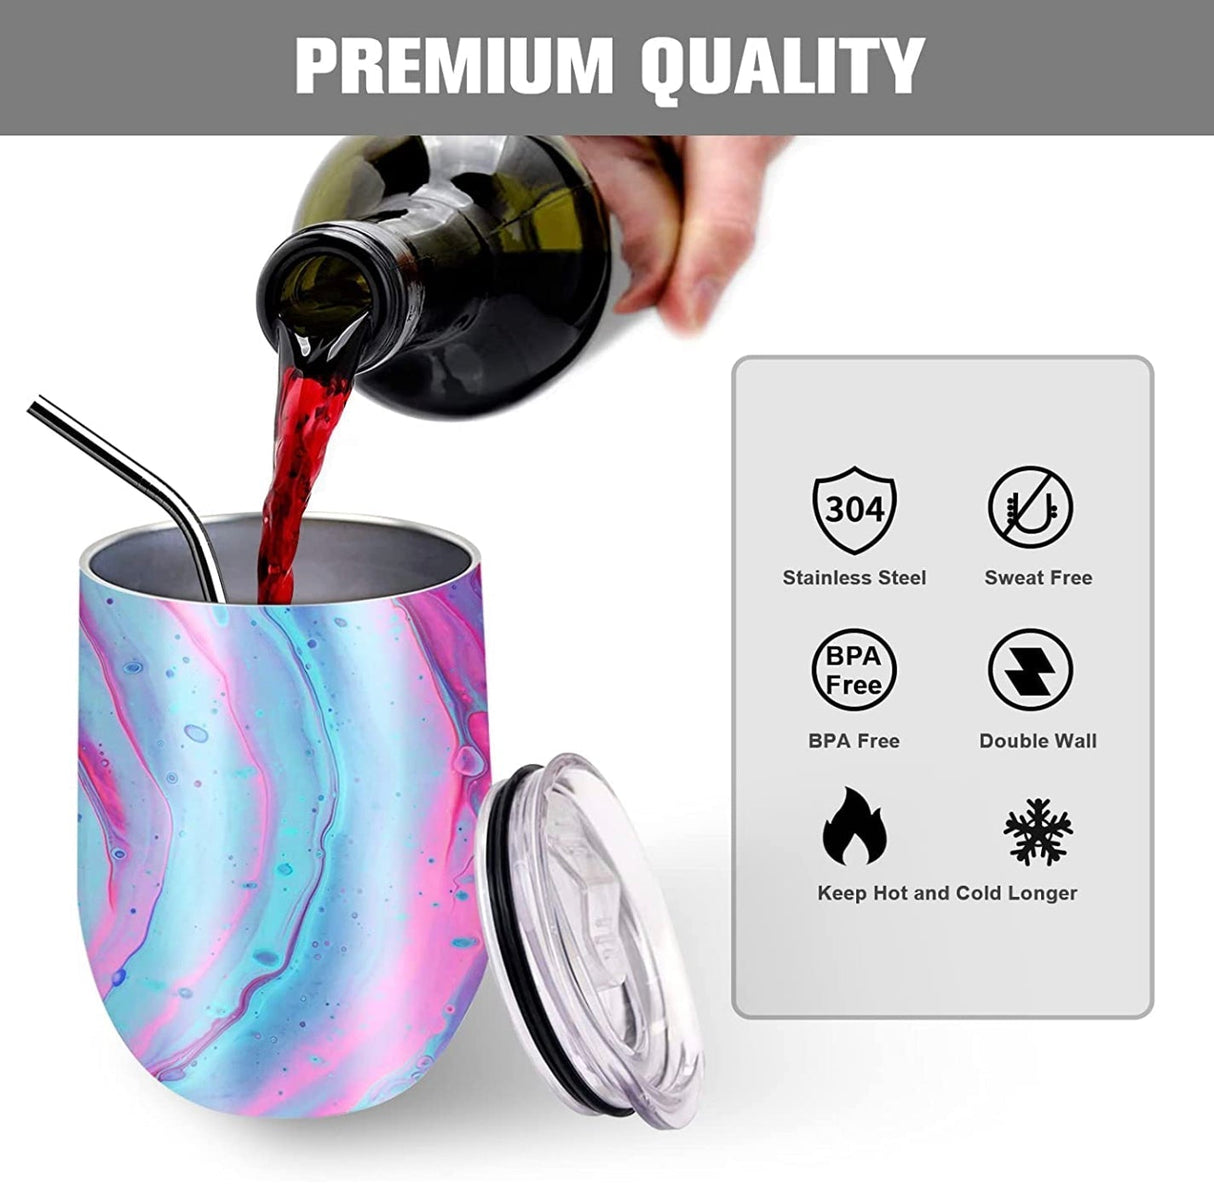 The Showjumper ~ The Best Equestrians - 12oz Insulated Wine Tumbler